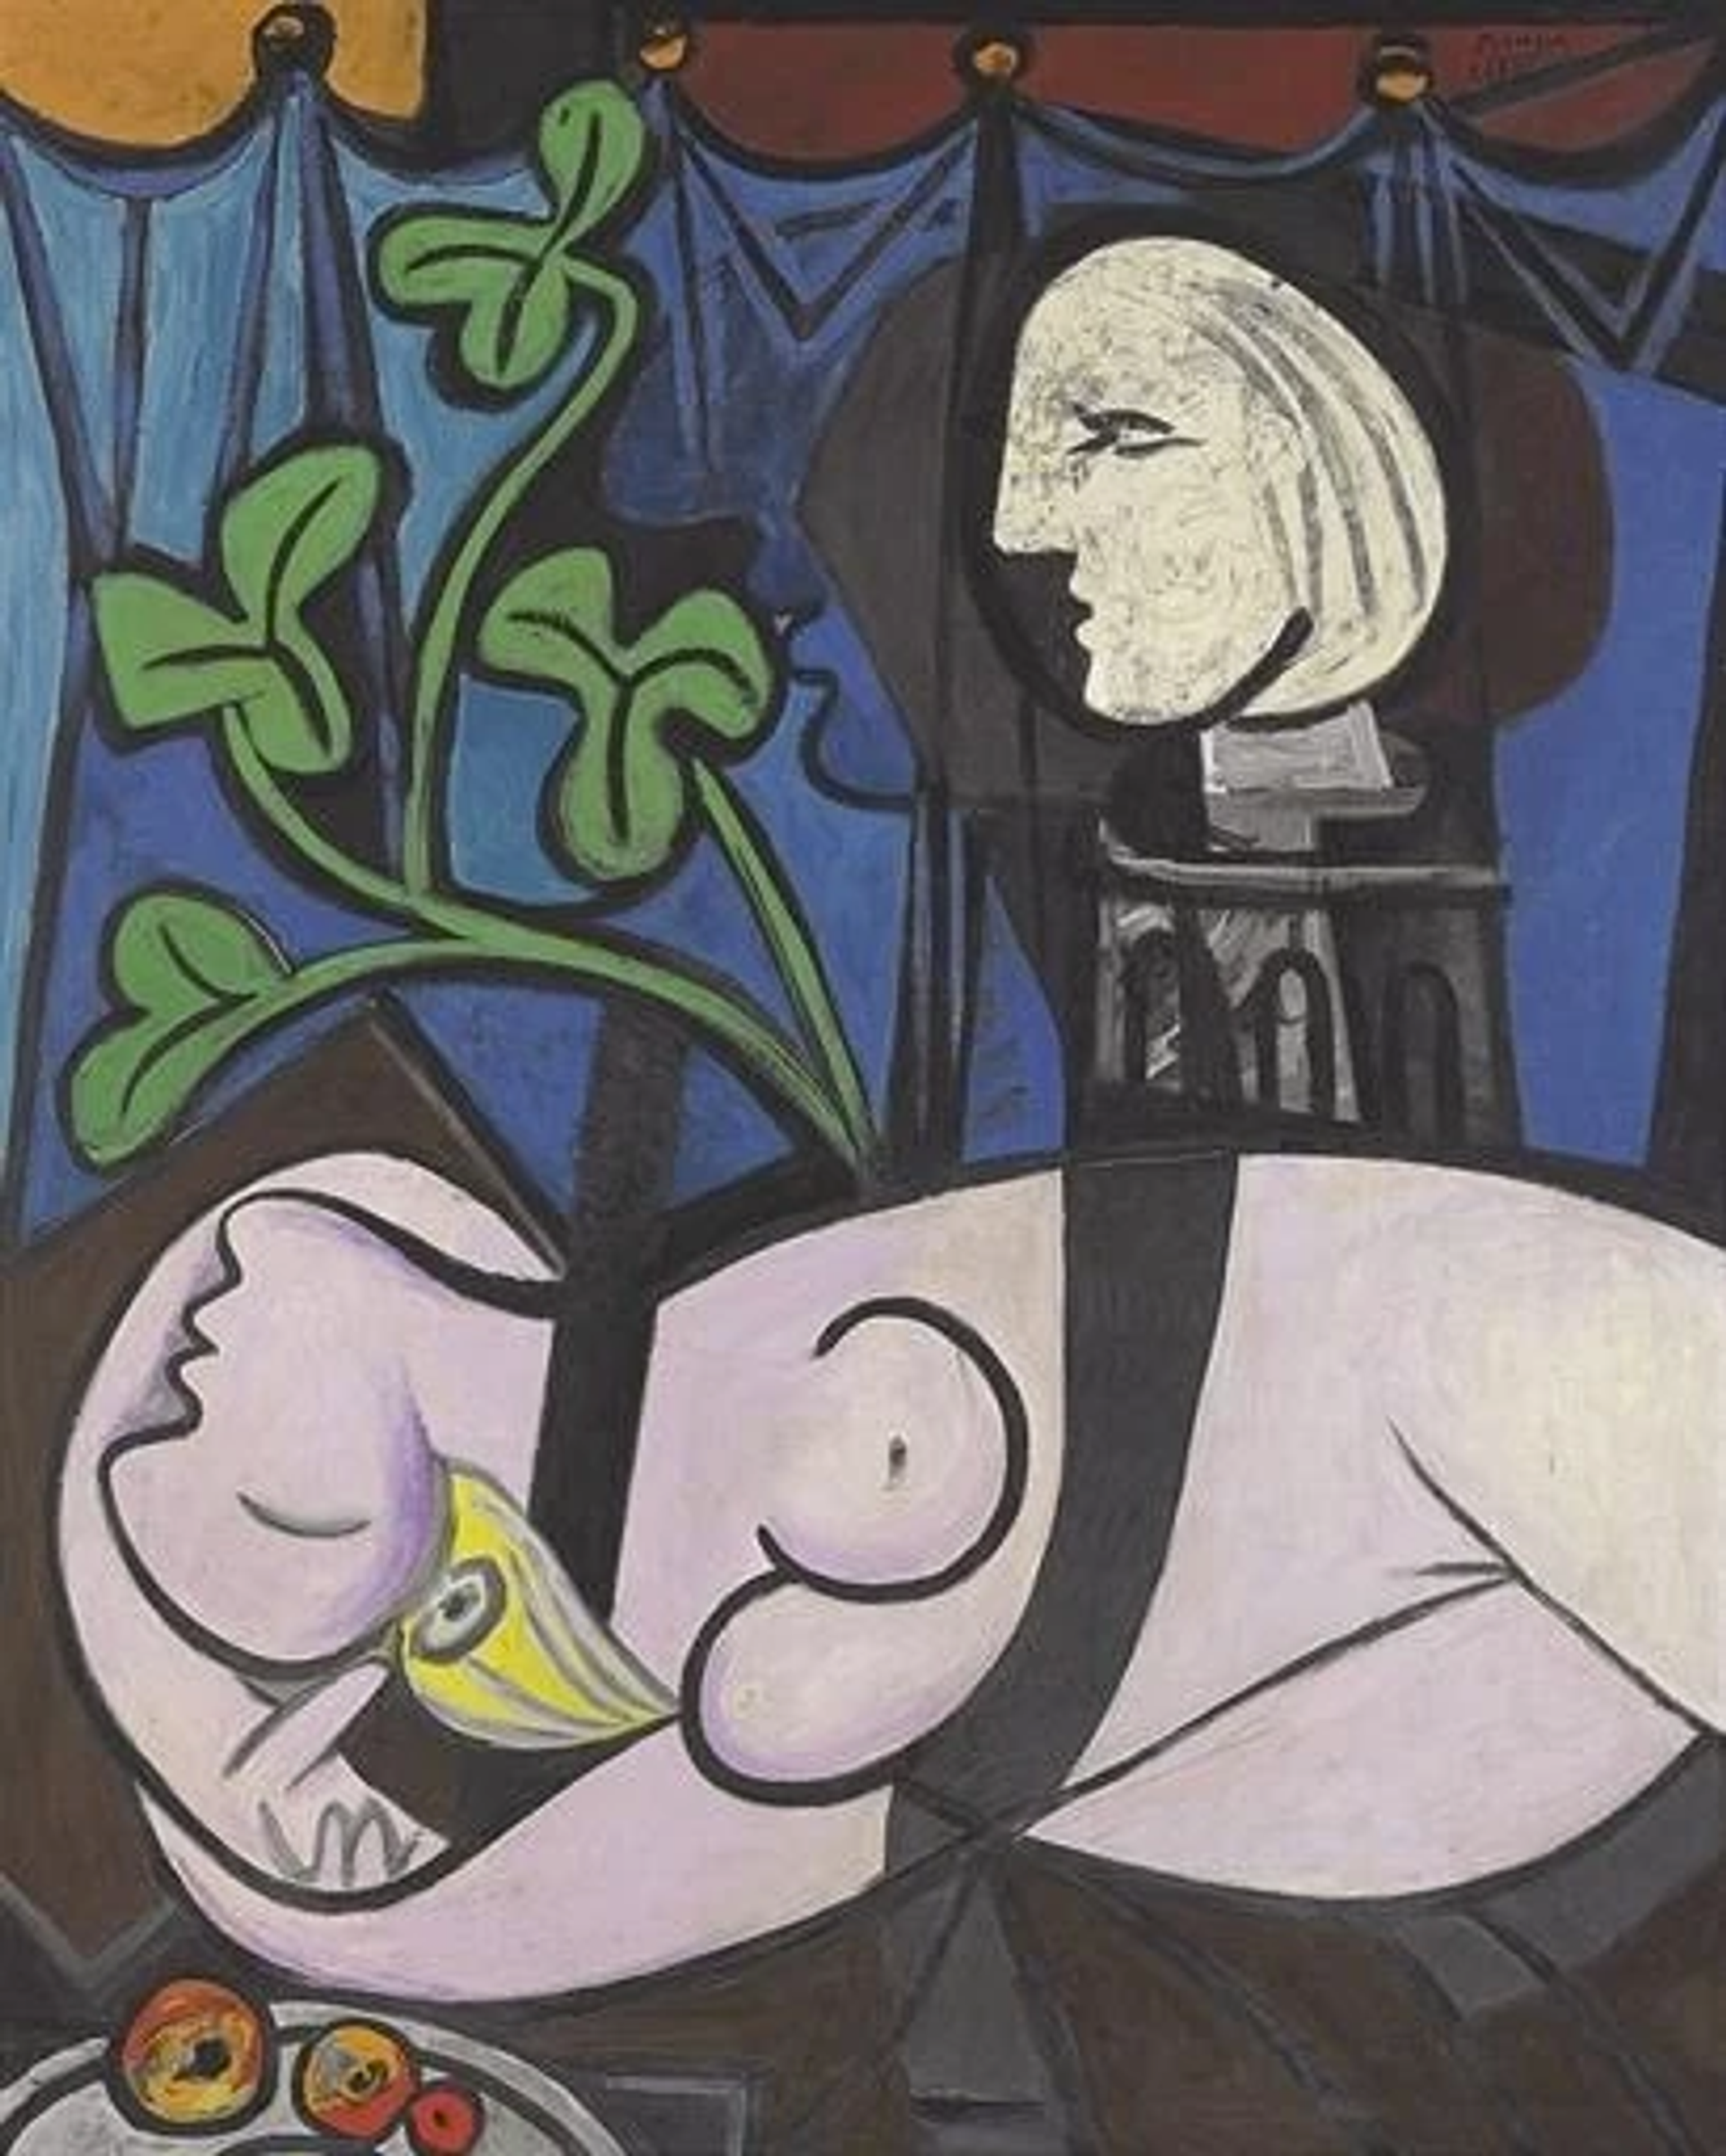 Painting by Pablo Picasso depicting a reclining nude female figure, a leafy green plant and a bust in front of a blue curtain.